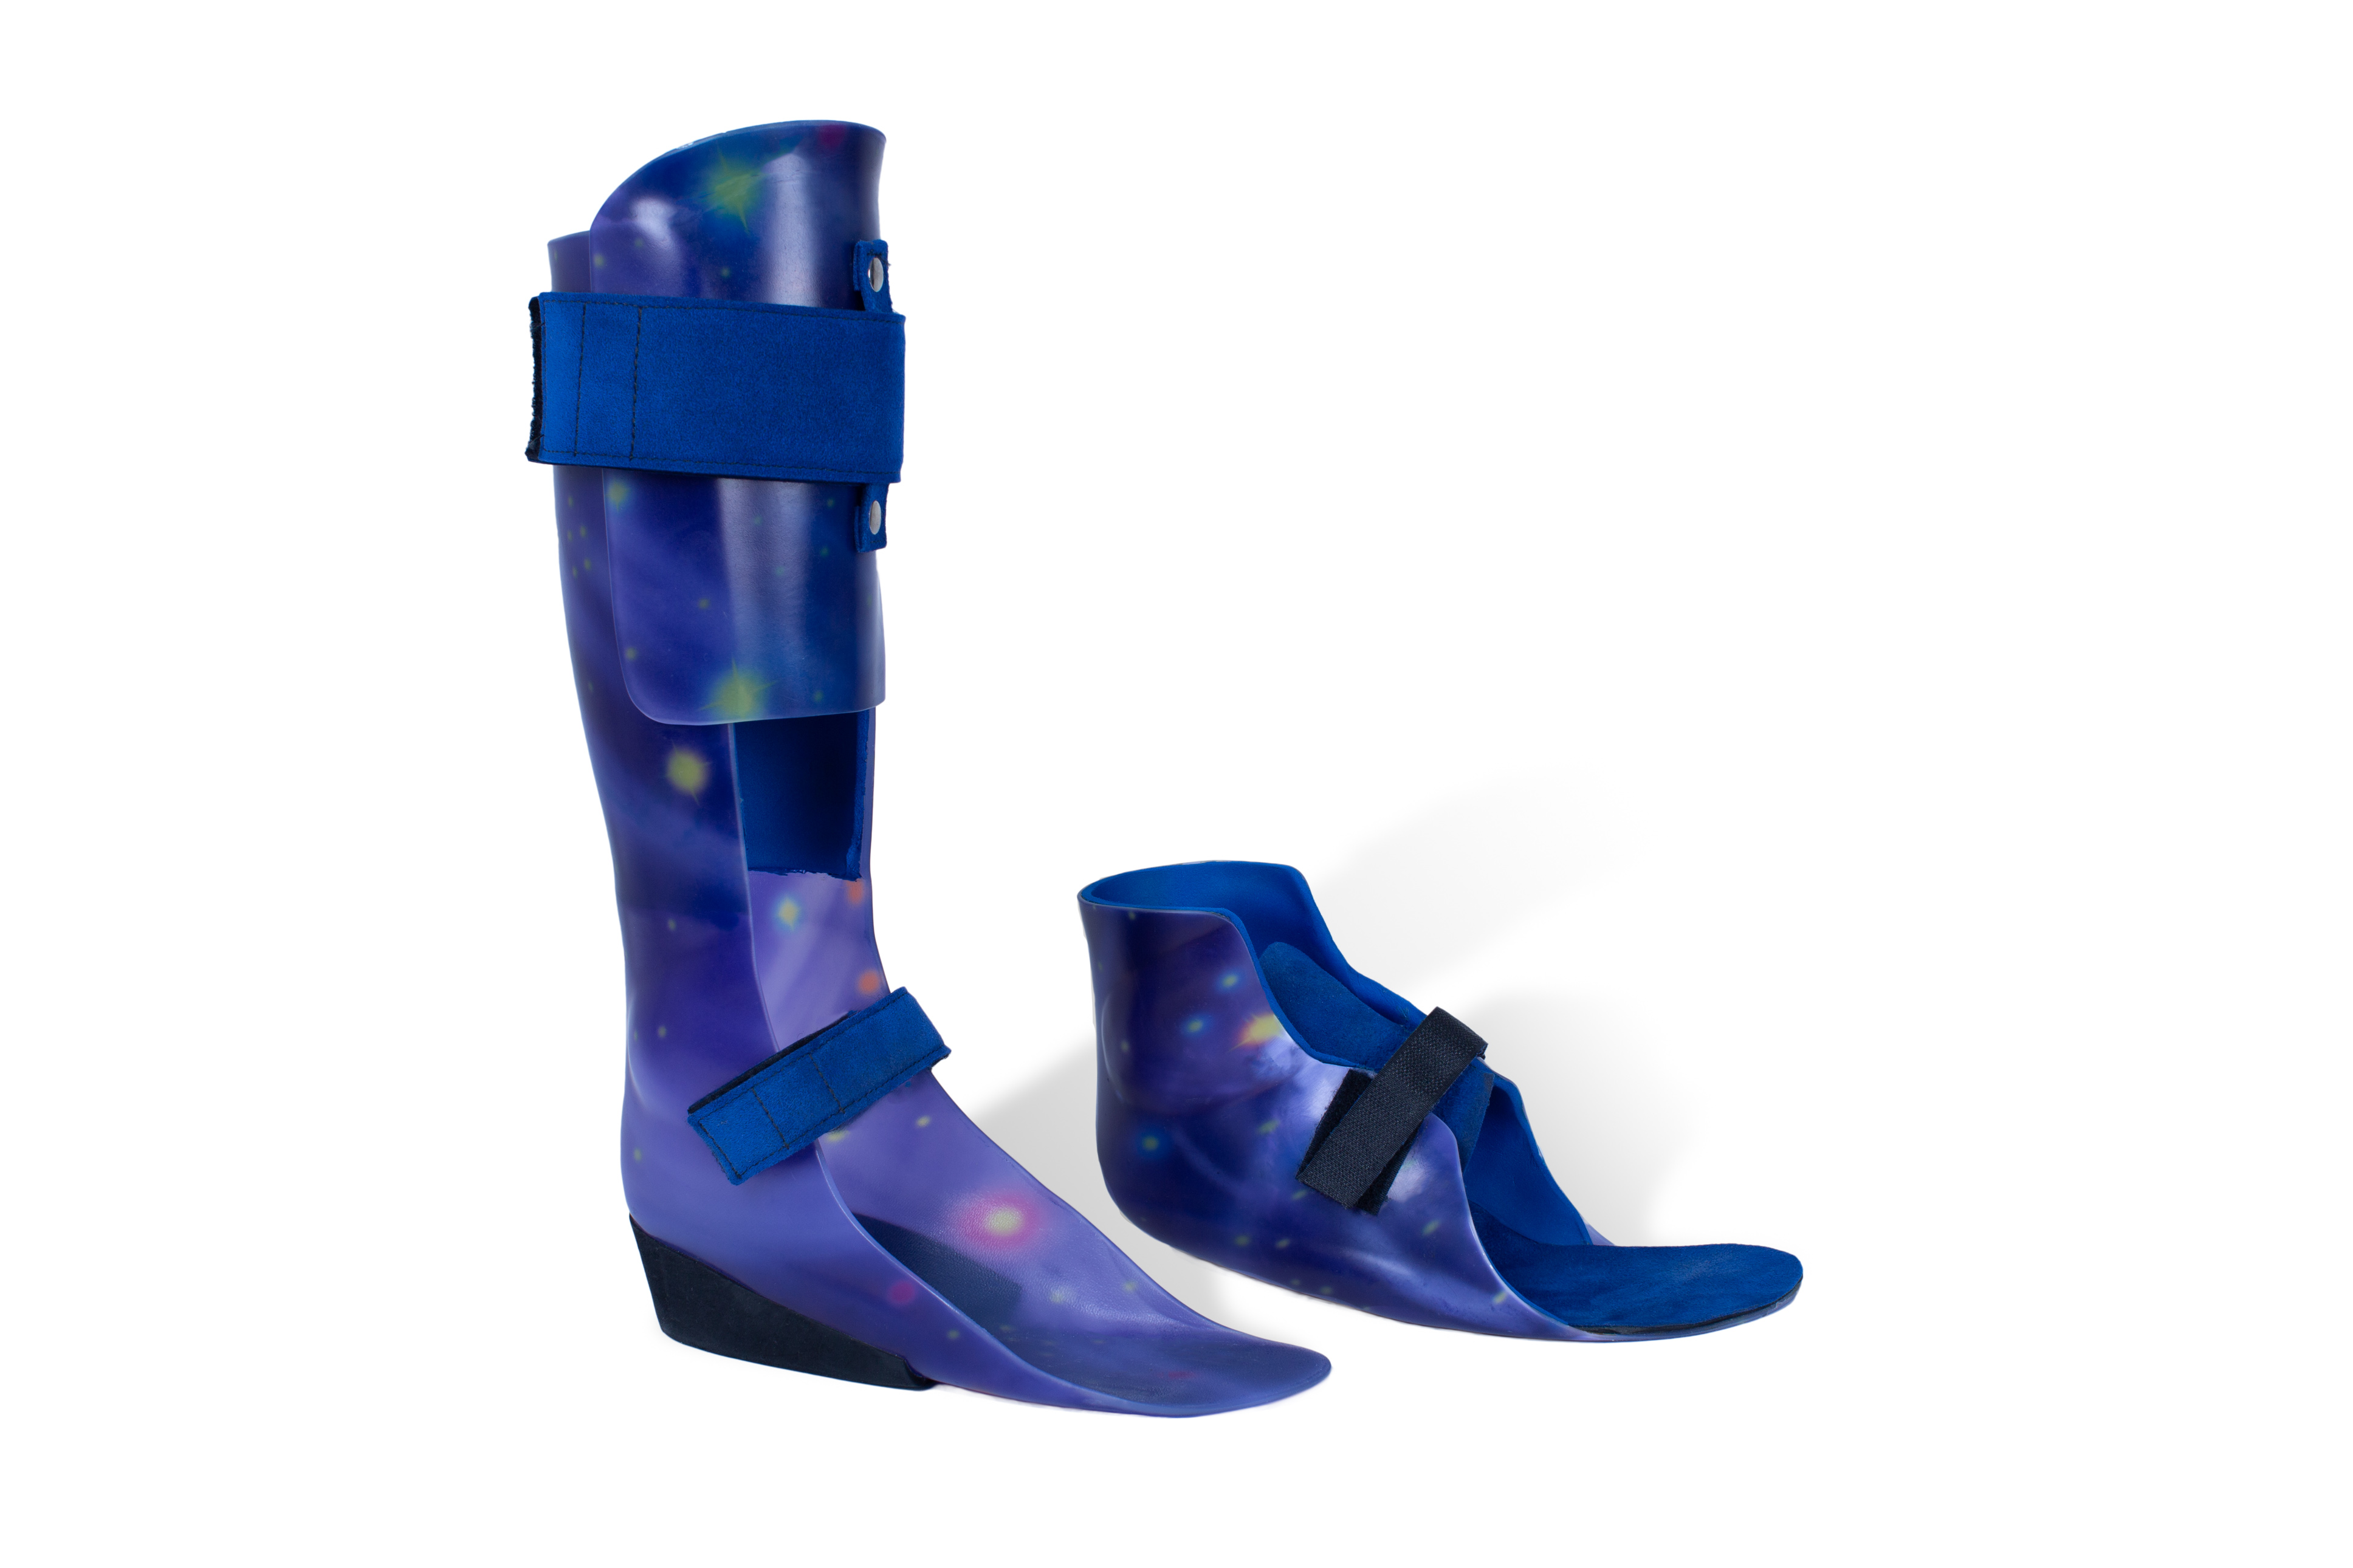 Dynamic Ankle Foot Orthoses (DAFOs)